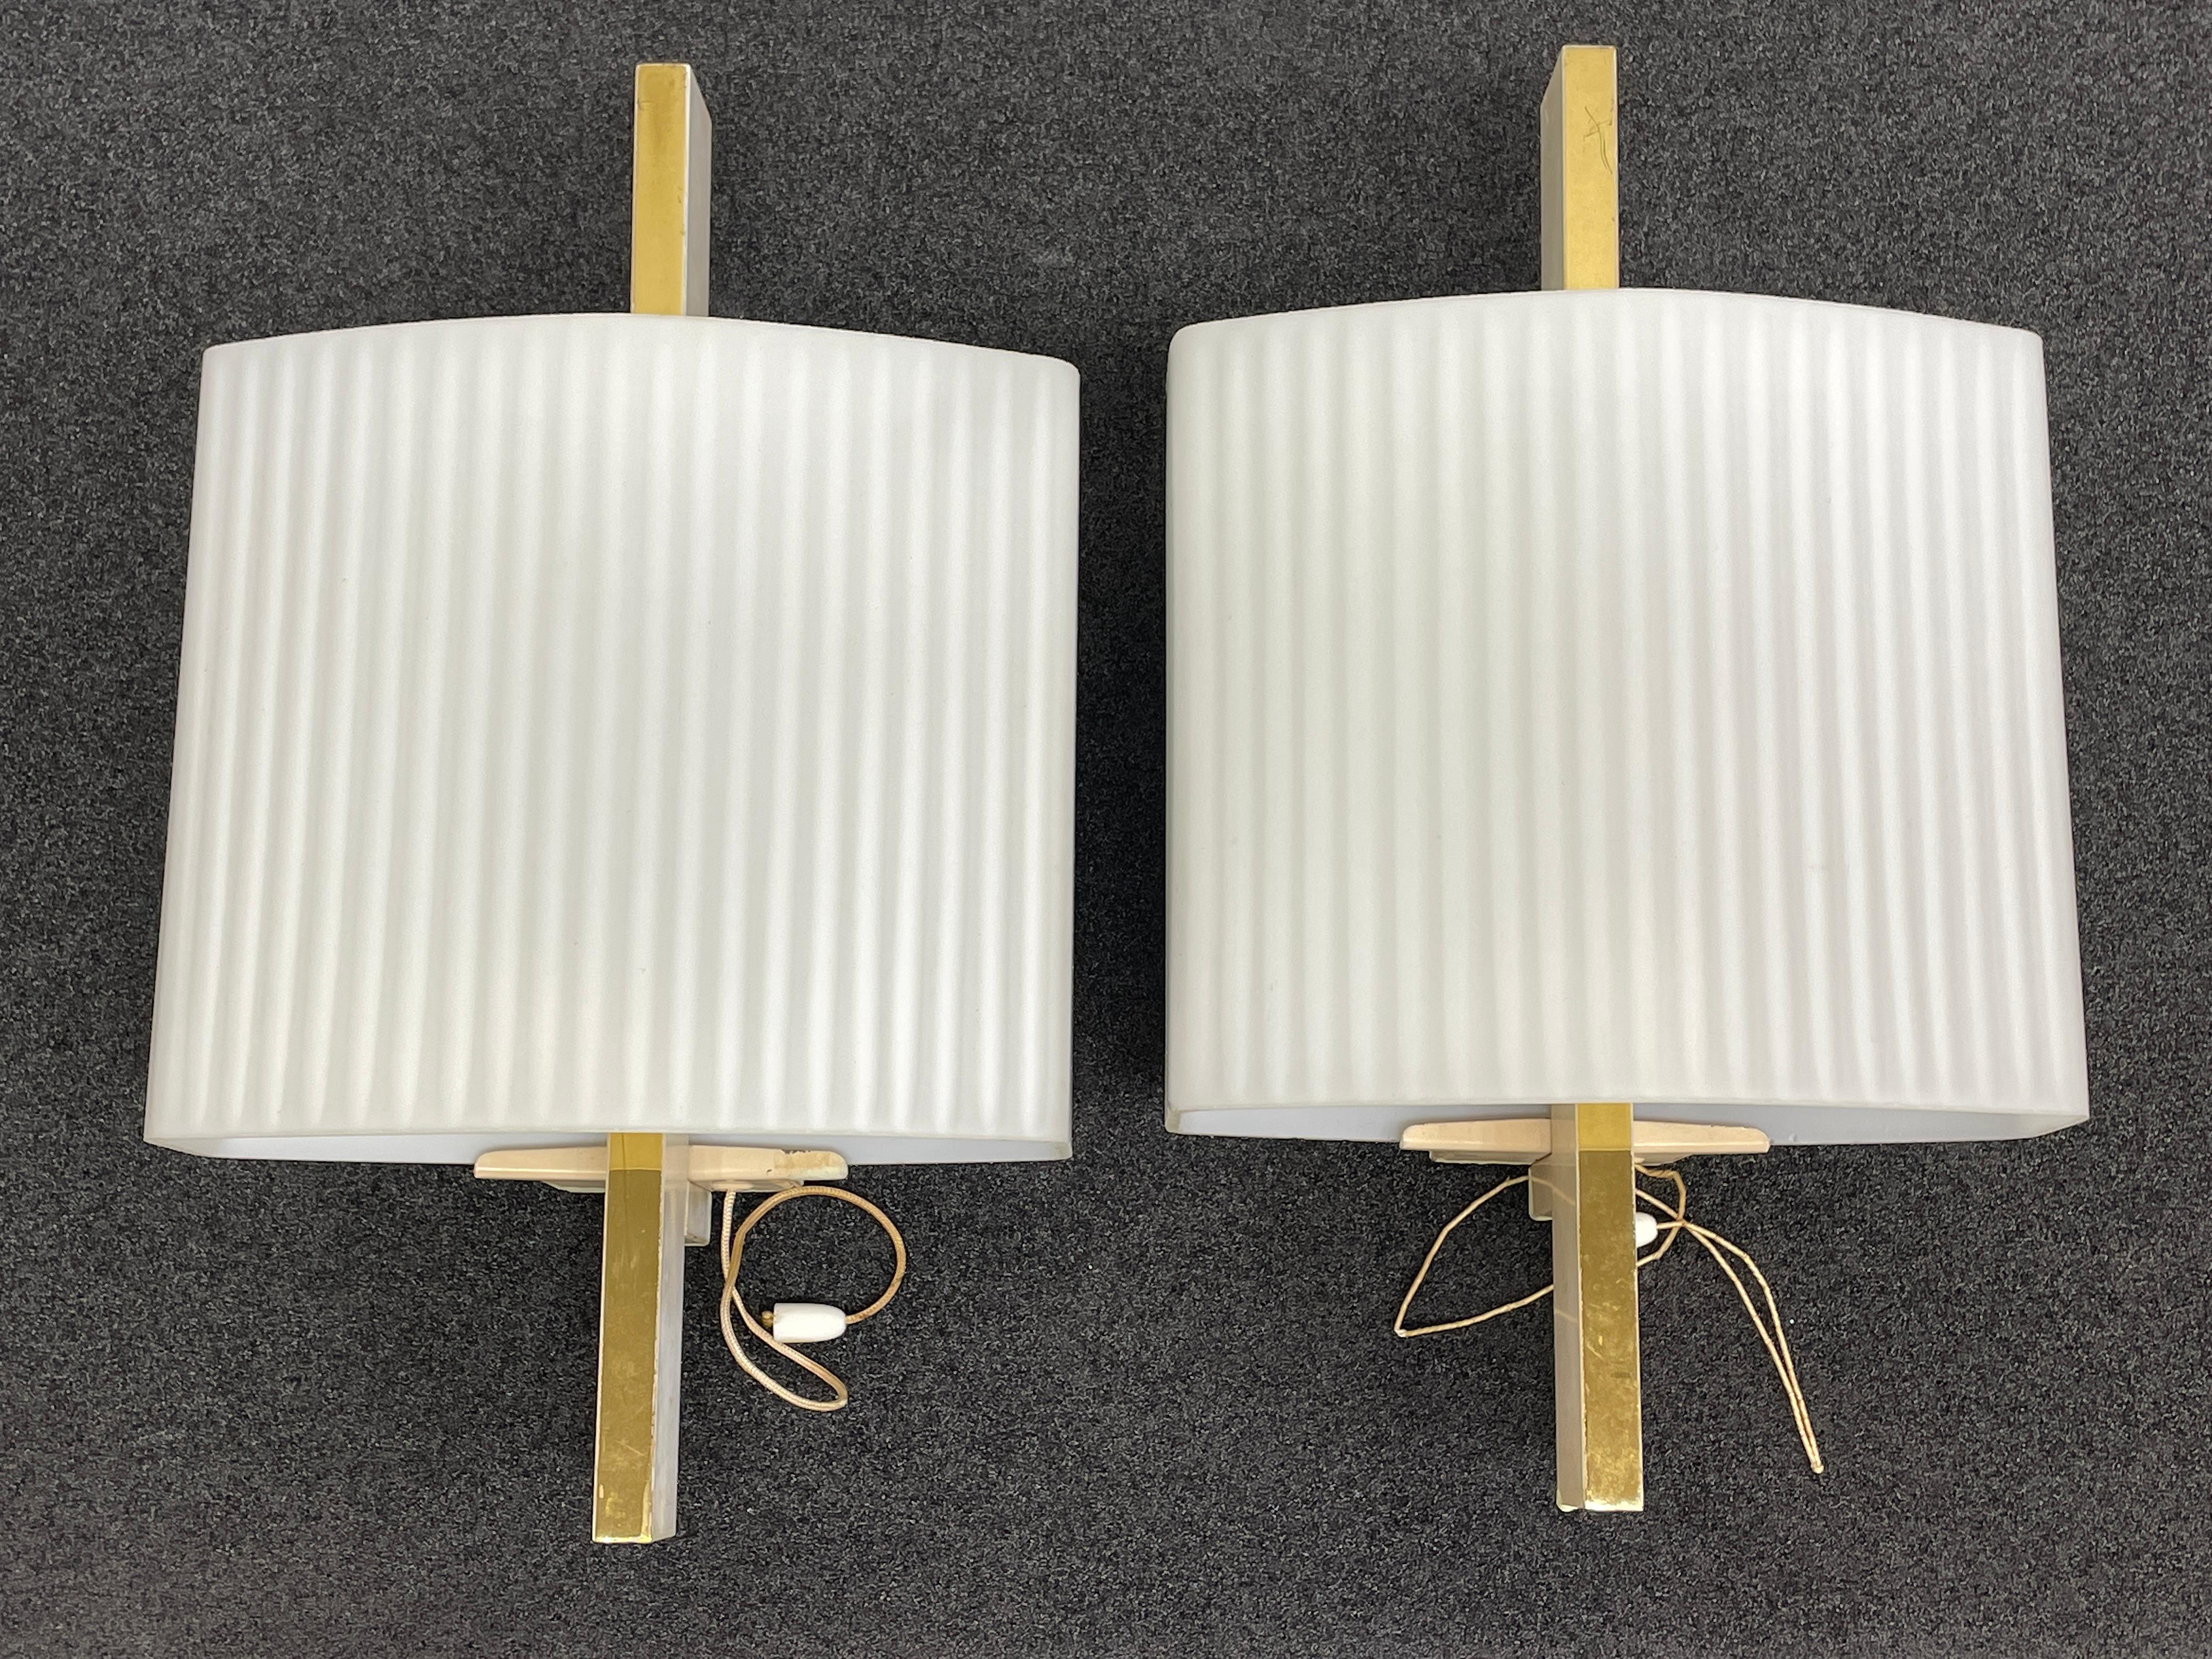 Pair of 1950s Stilnovo style sconces. Original European wiring. Very Mid-Century Modern looking. Each fixture requires one European E14 / 110 Volt candelabra bulb, up to 60 watts. Nice chic Mid-Century Modern design gives a real classy statement.